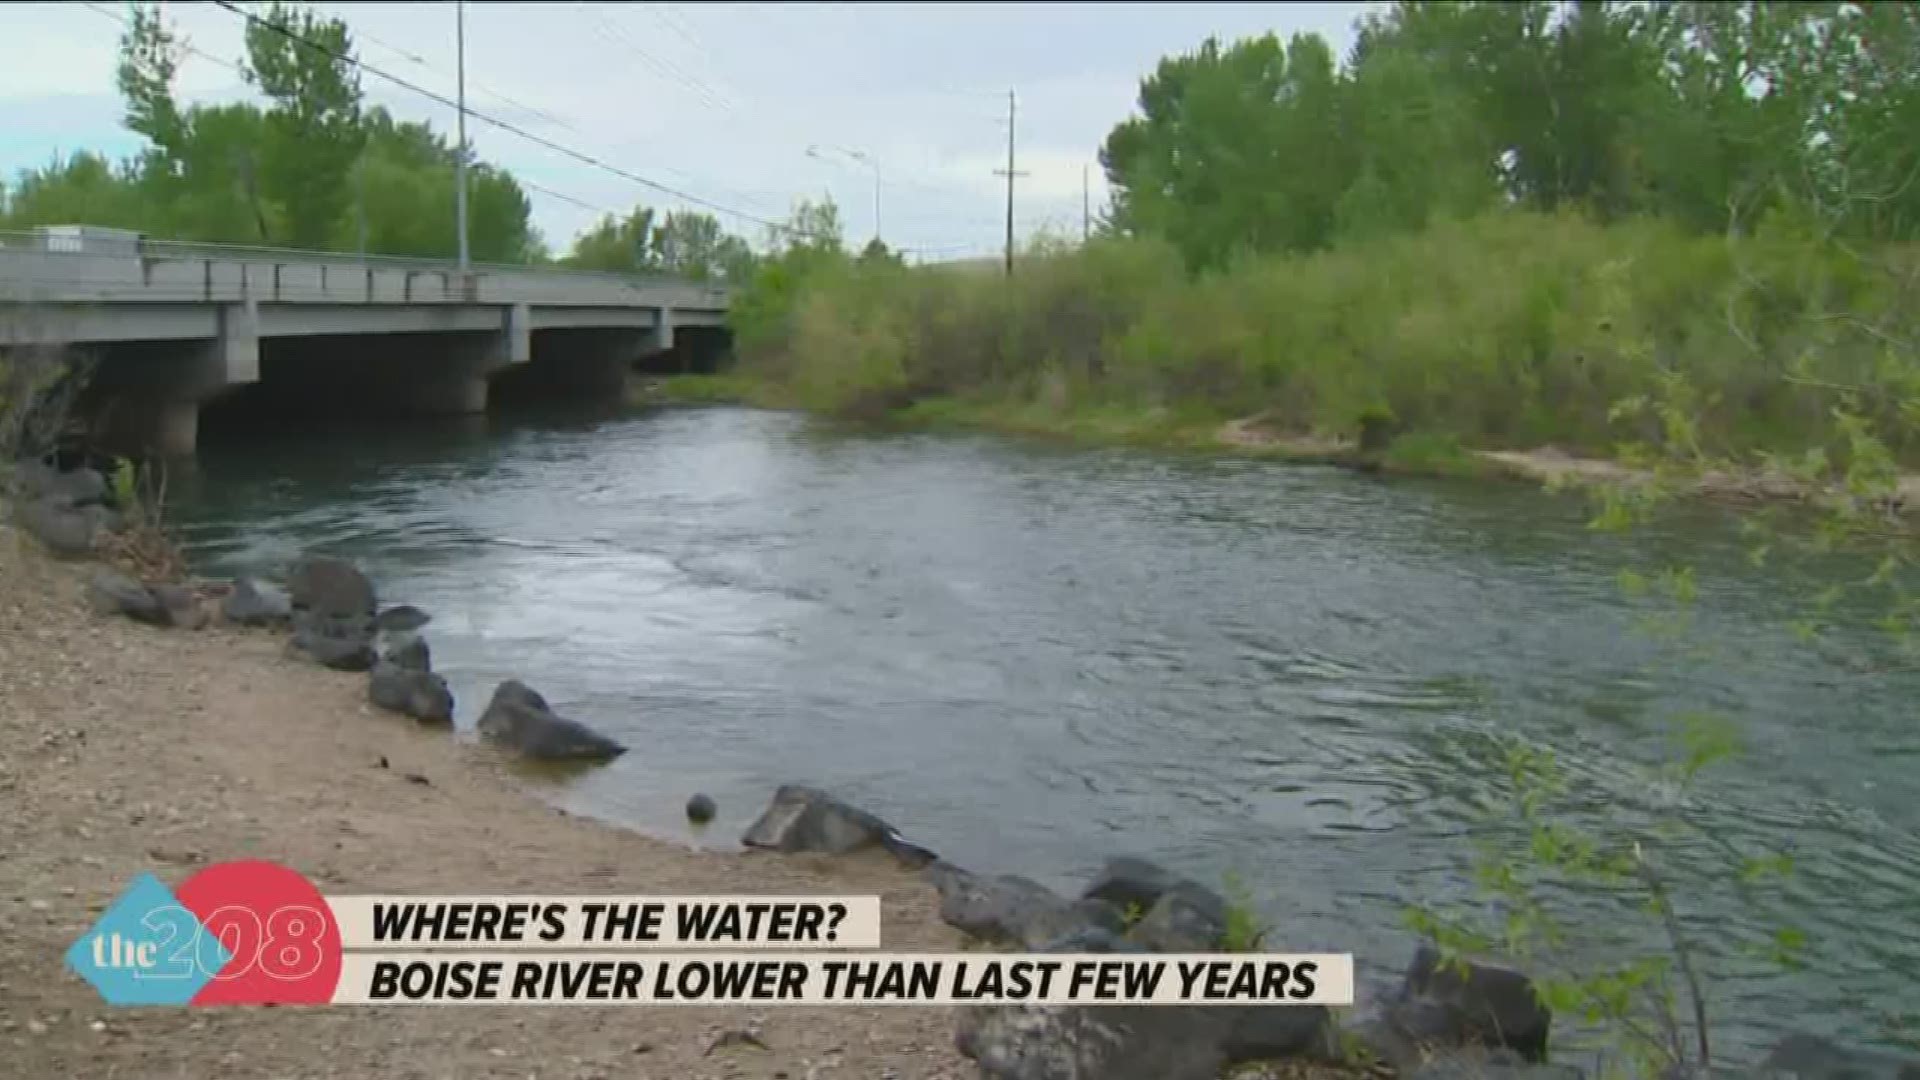 Water is not being released into the Boise River for flood control operations this year.